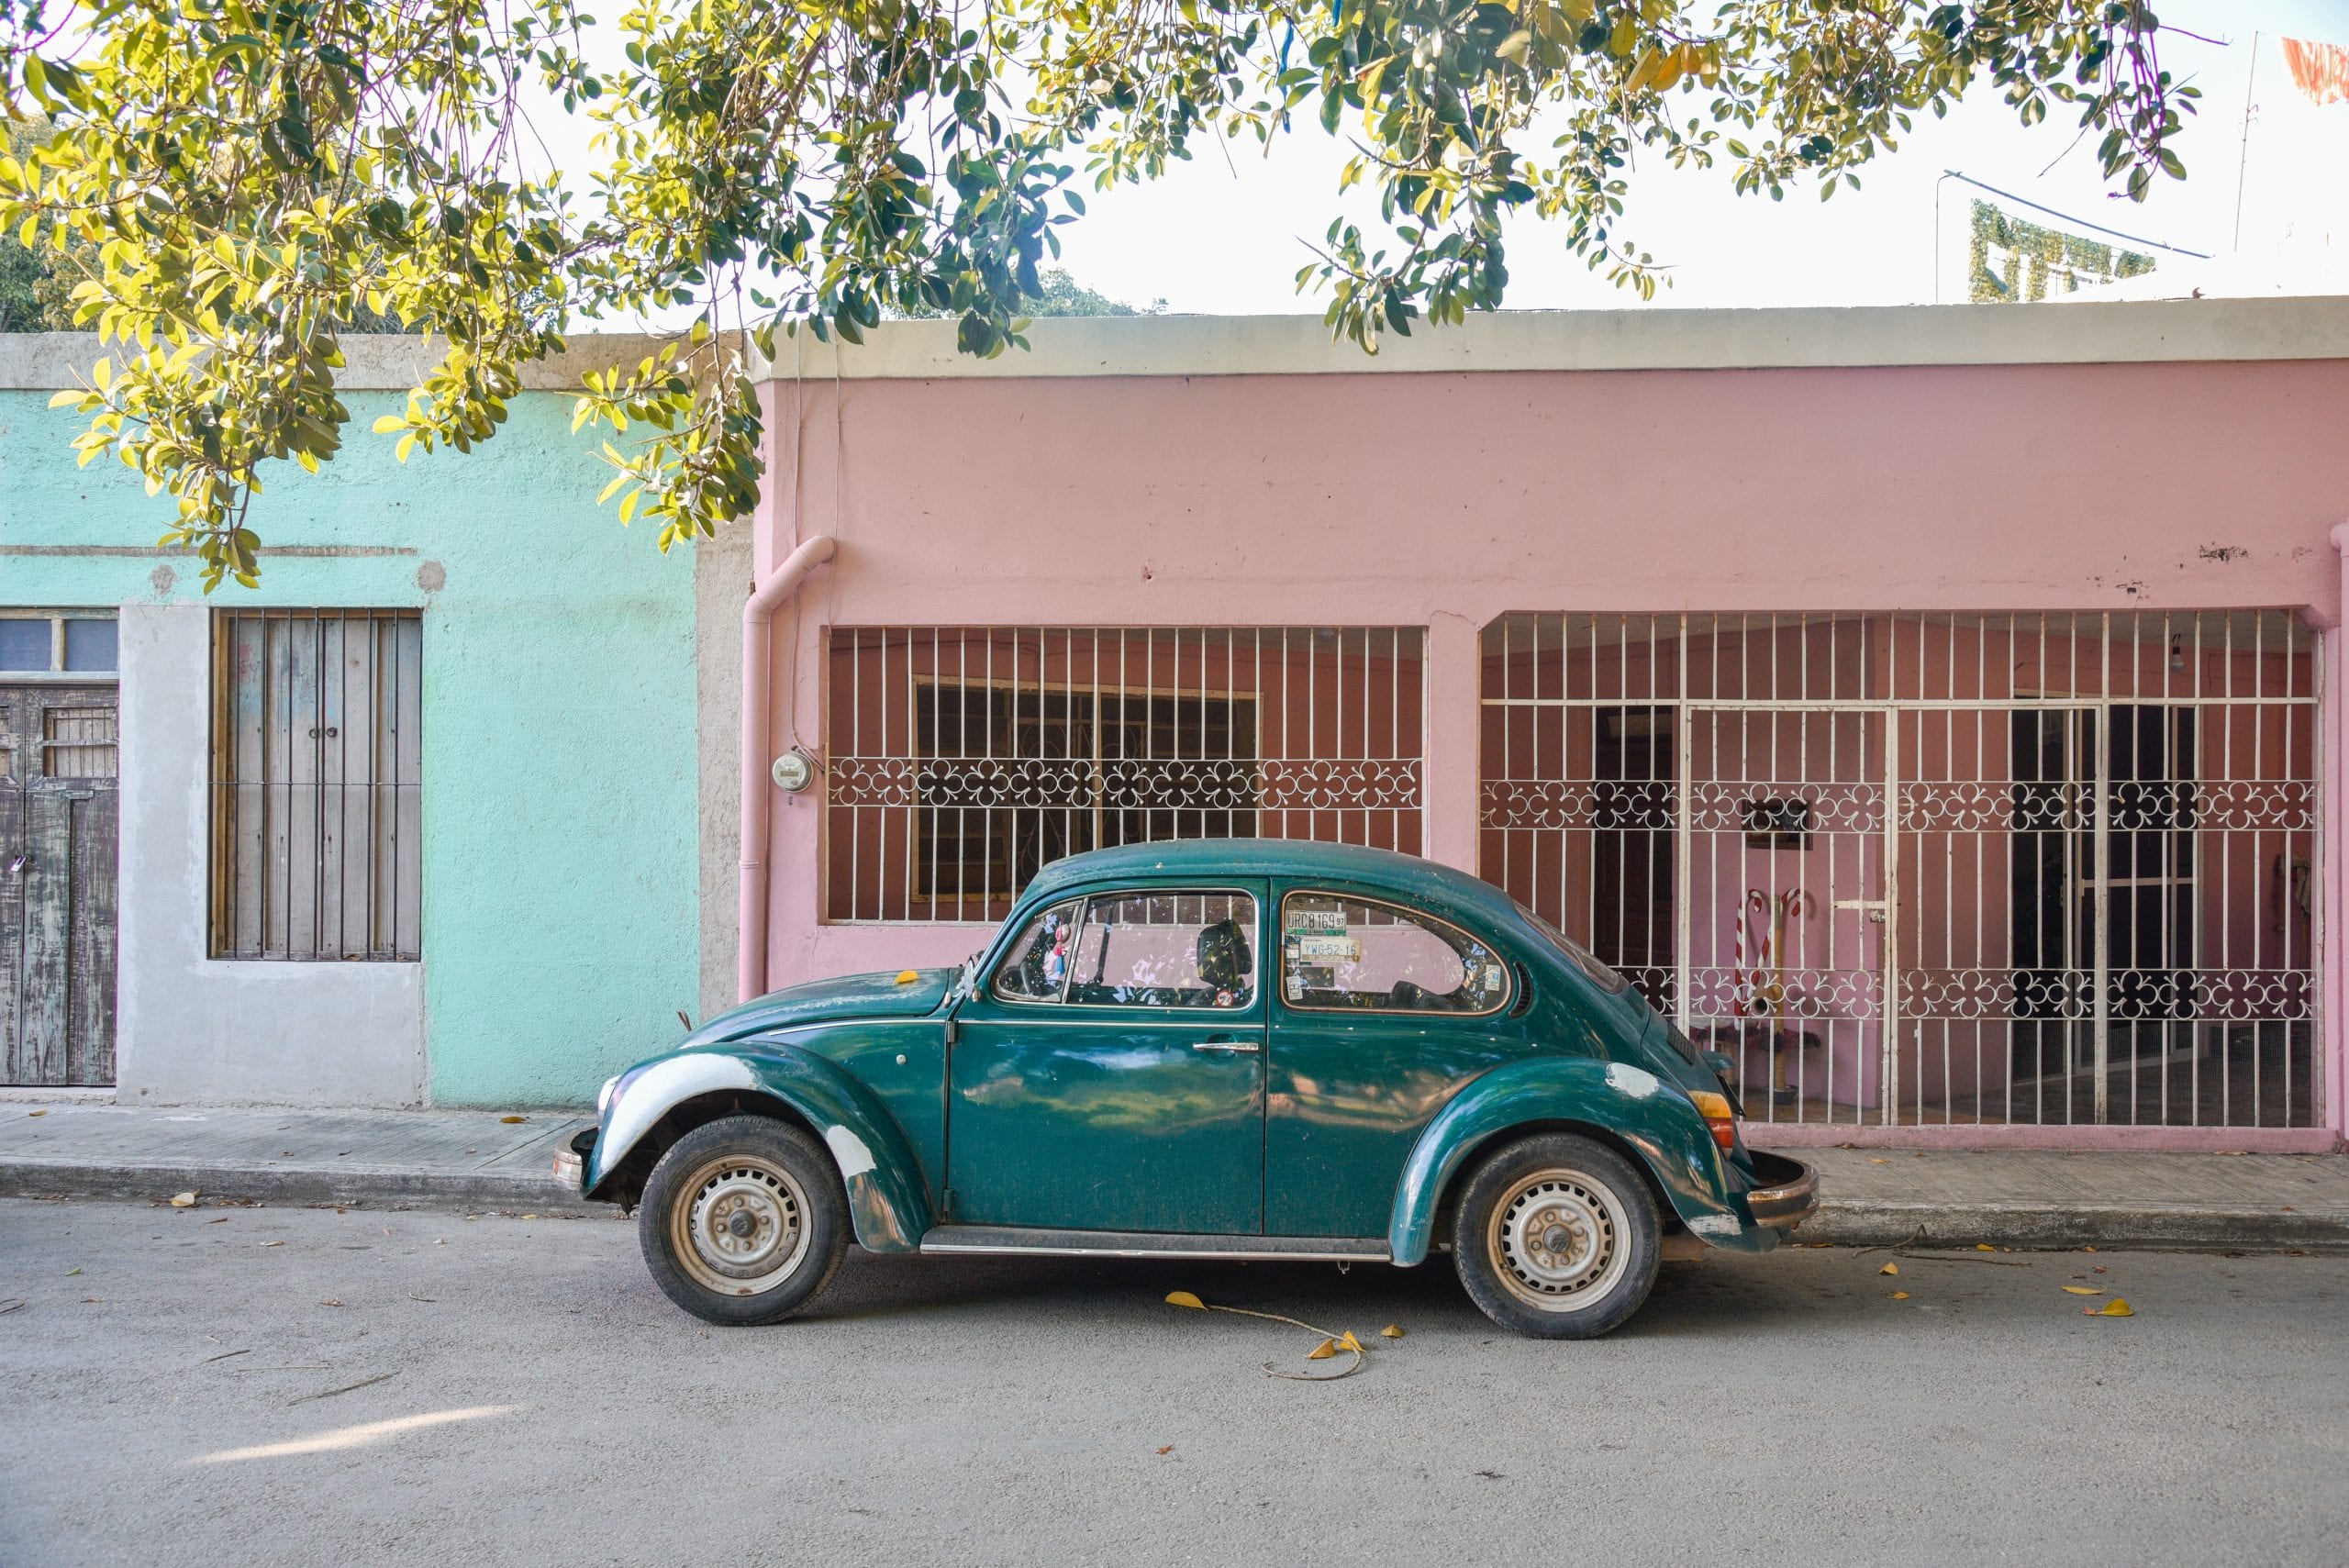 renting-a-car-in-canun-mexico